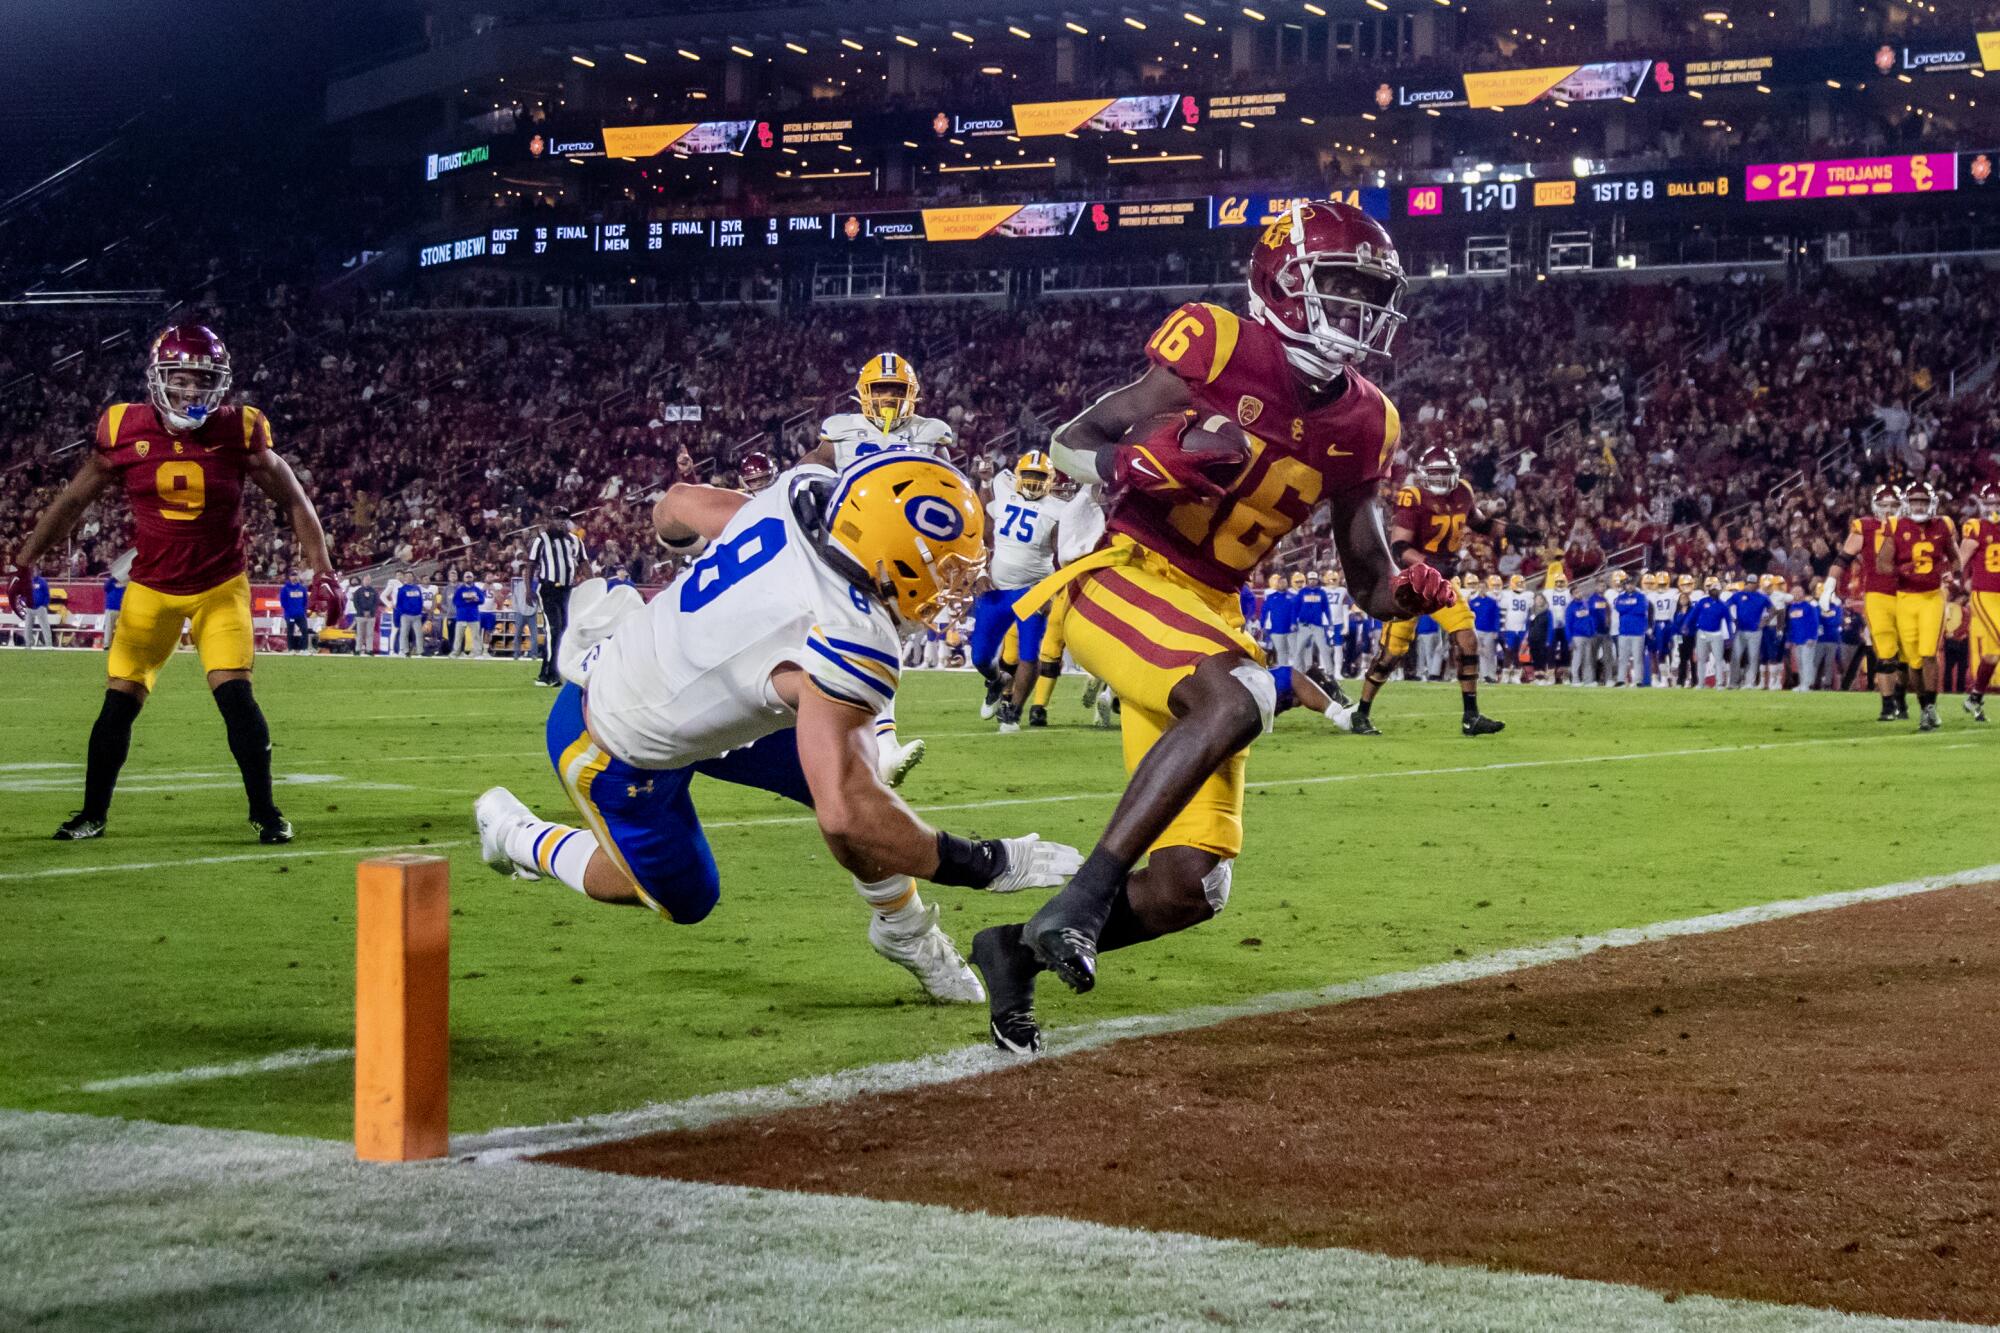 USC wide receiver Tahj Washington scampers into the end zone in front of California linebacker Jackson Sirmon.